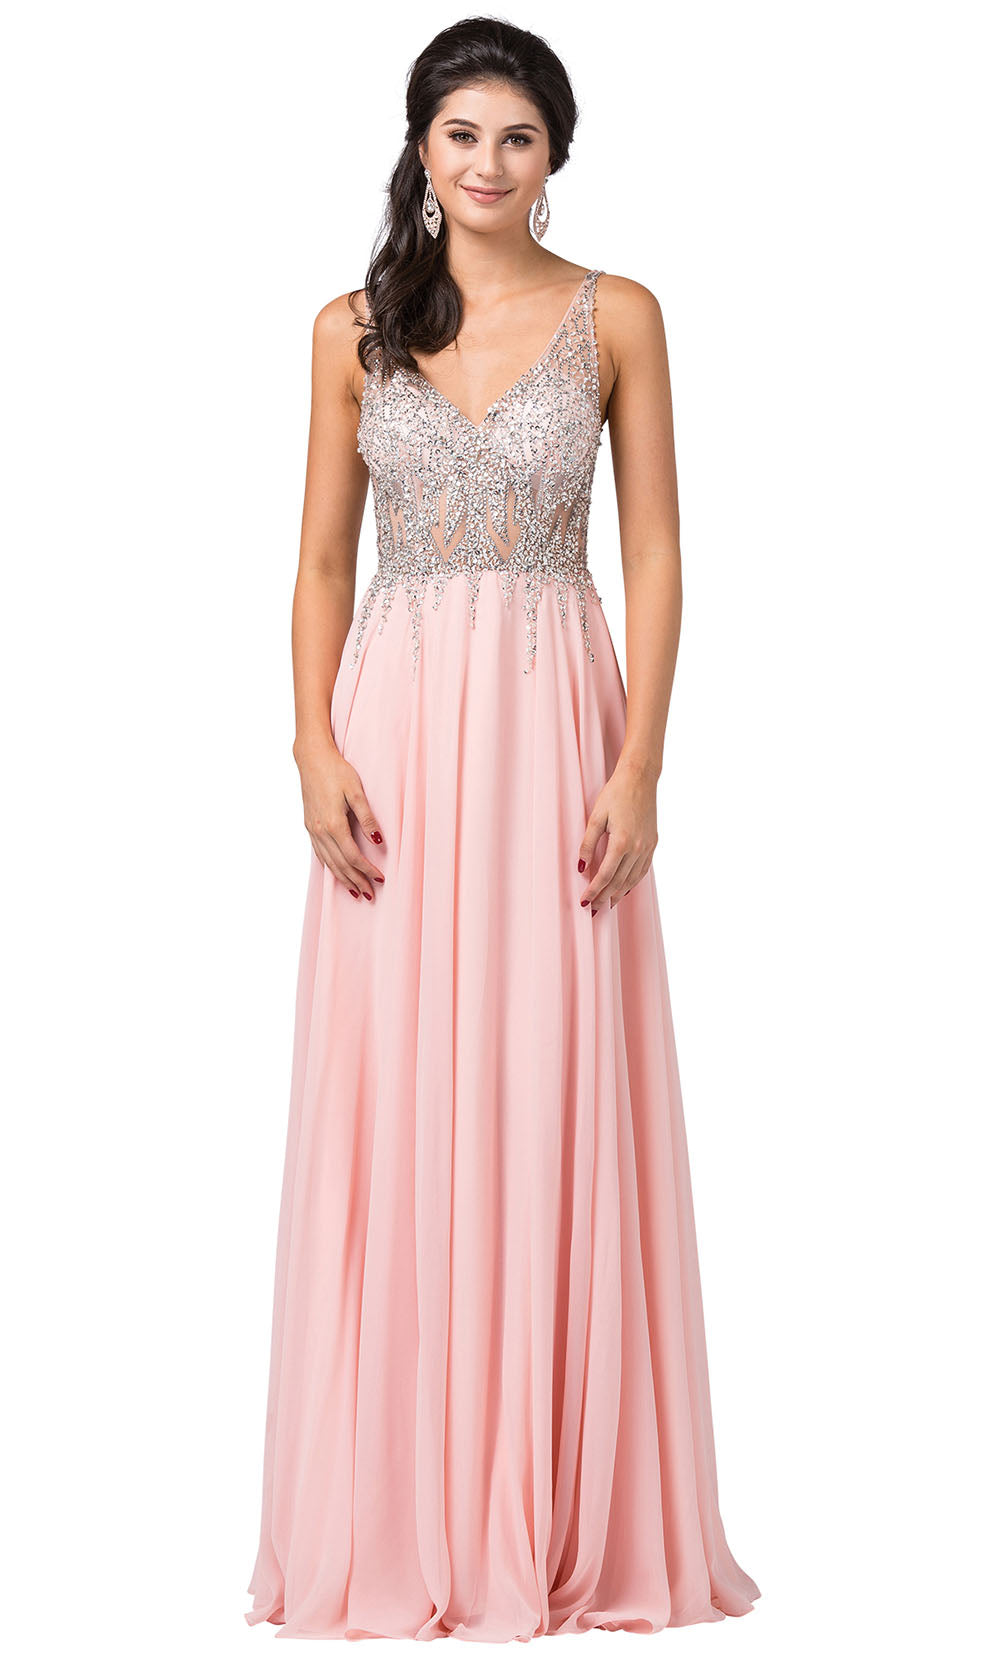 Dancing Queen - 2570 Embellished Sheer Bodice A-Line Gown In Pink